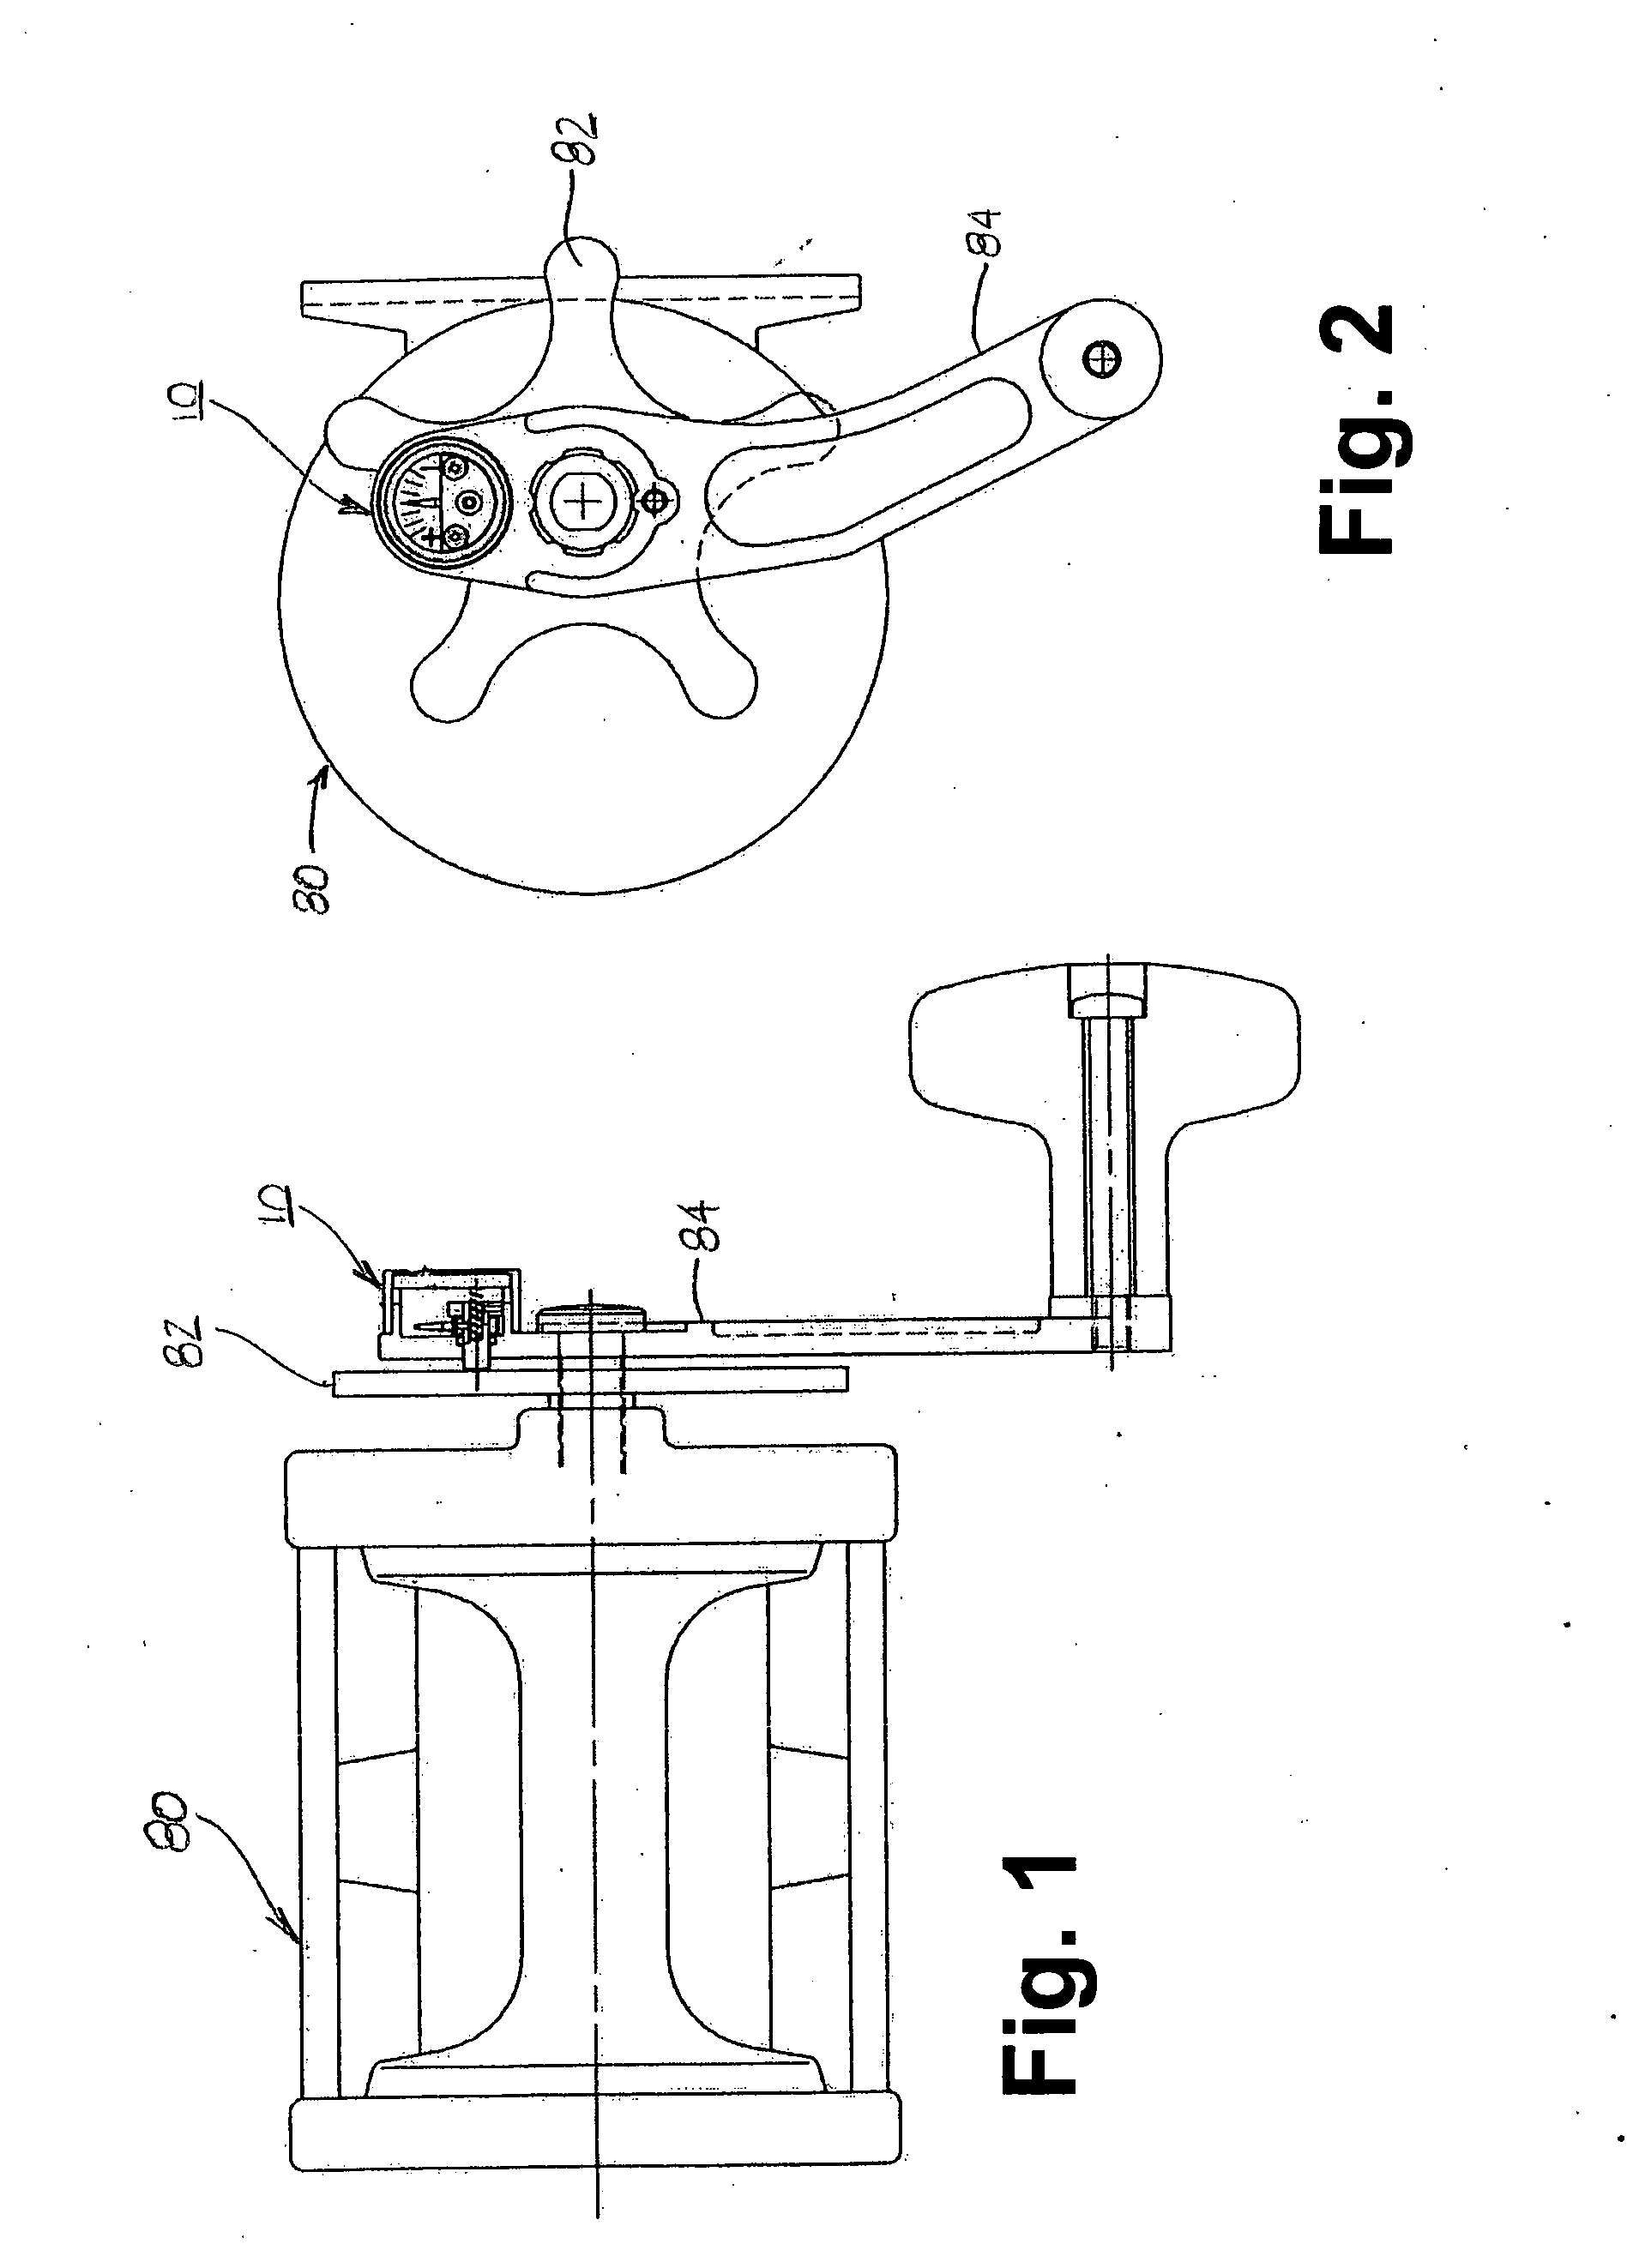 Relative line tension indicator and methods for fishing reels and the like